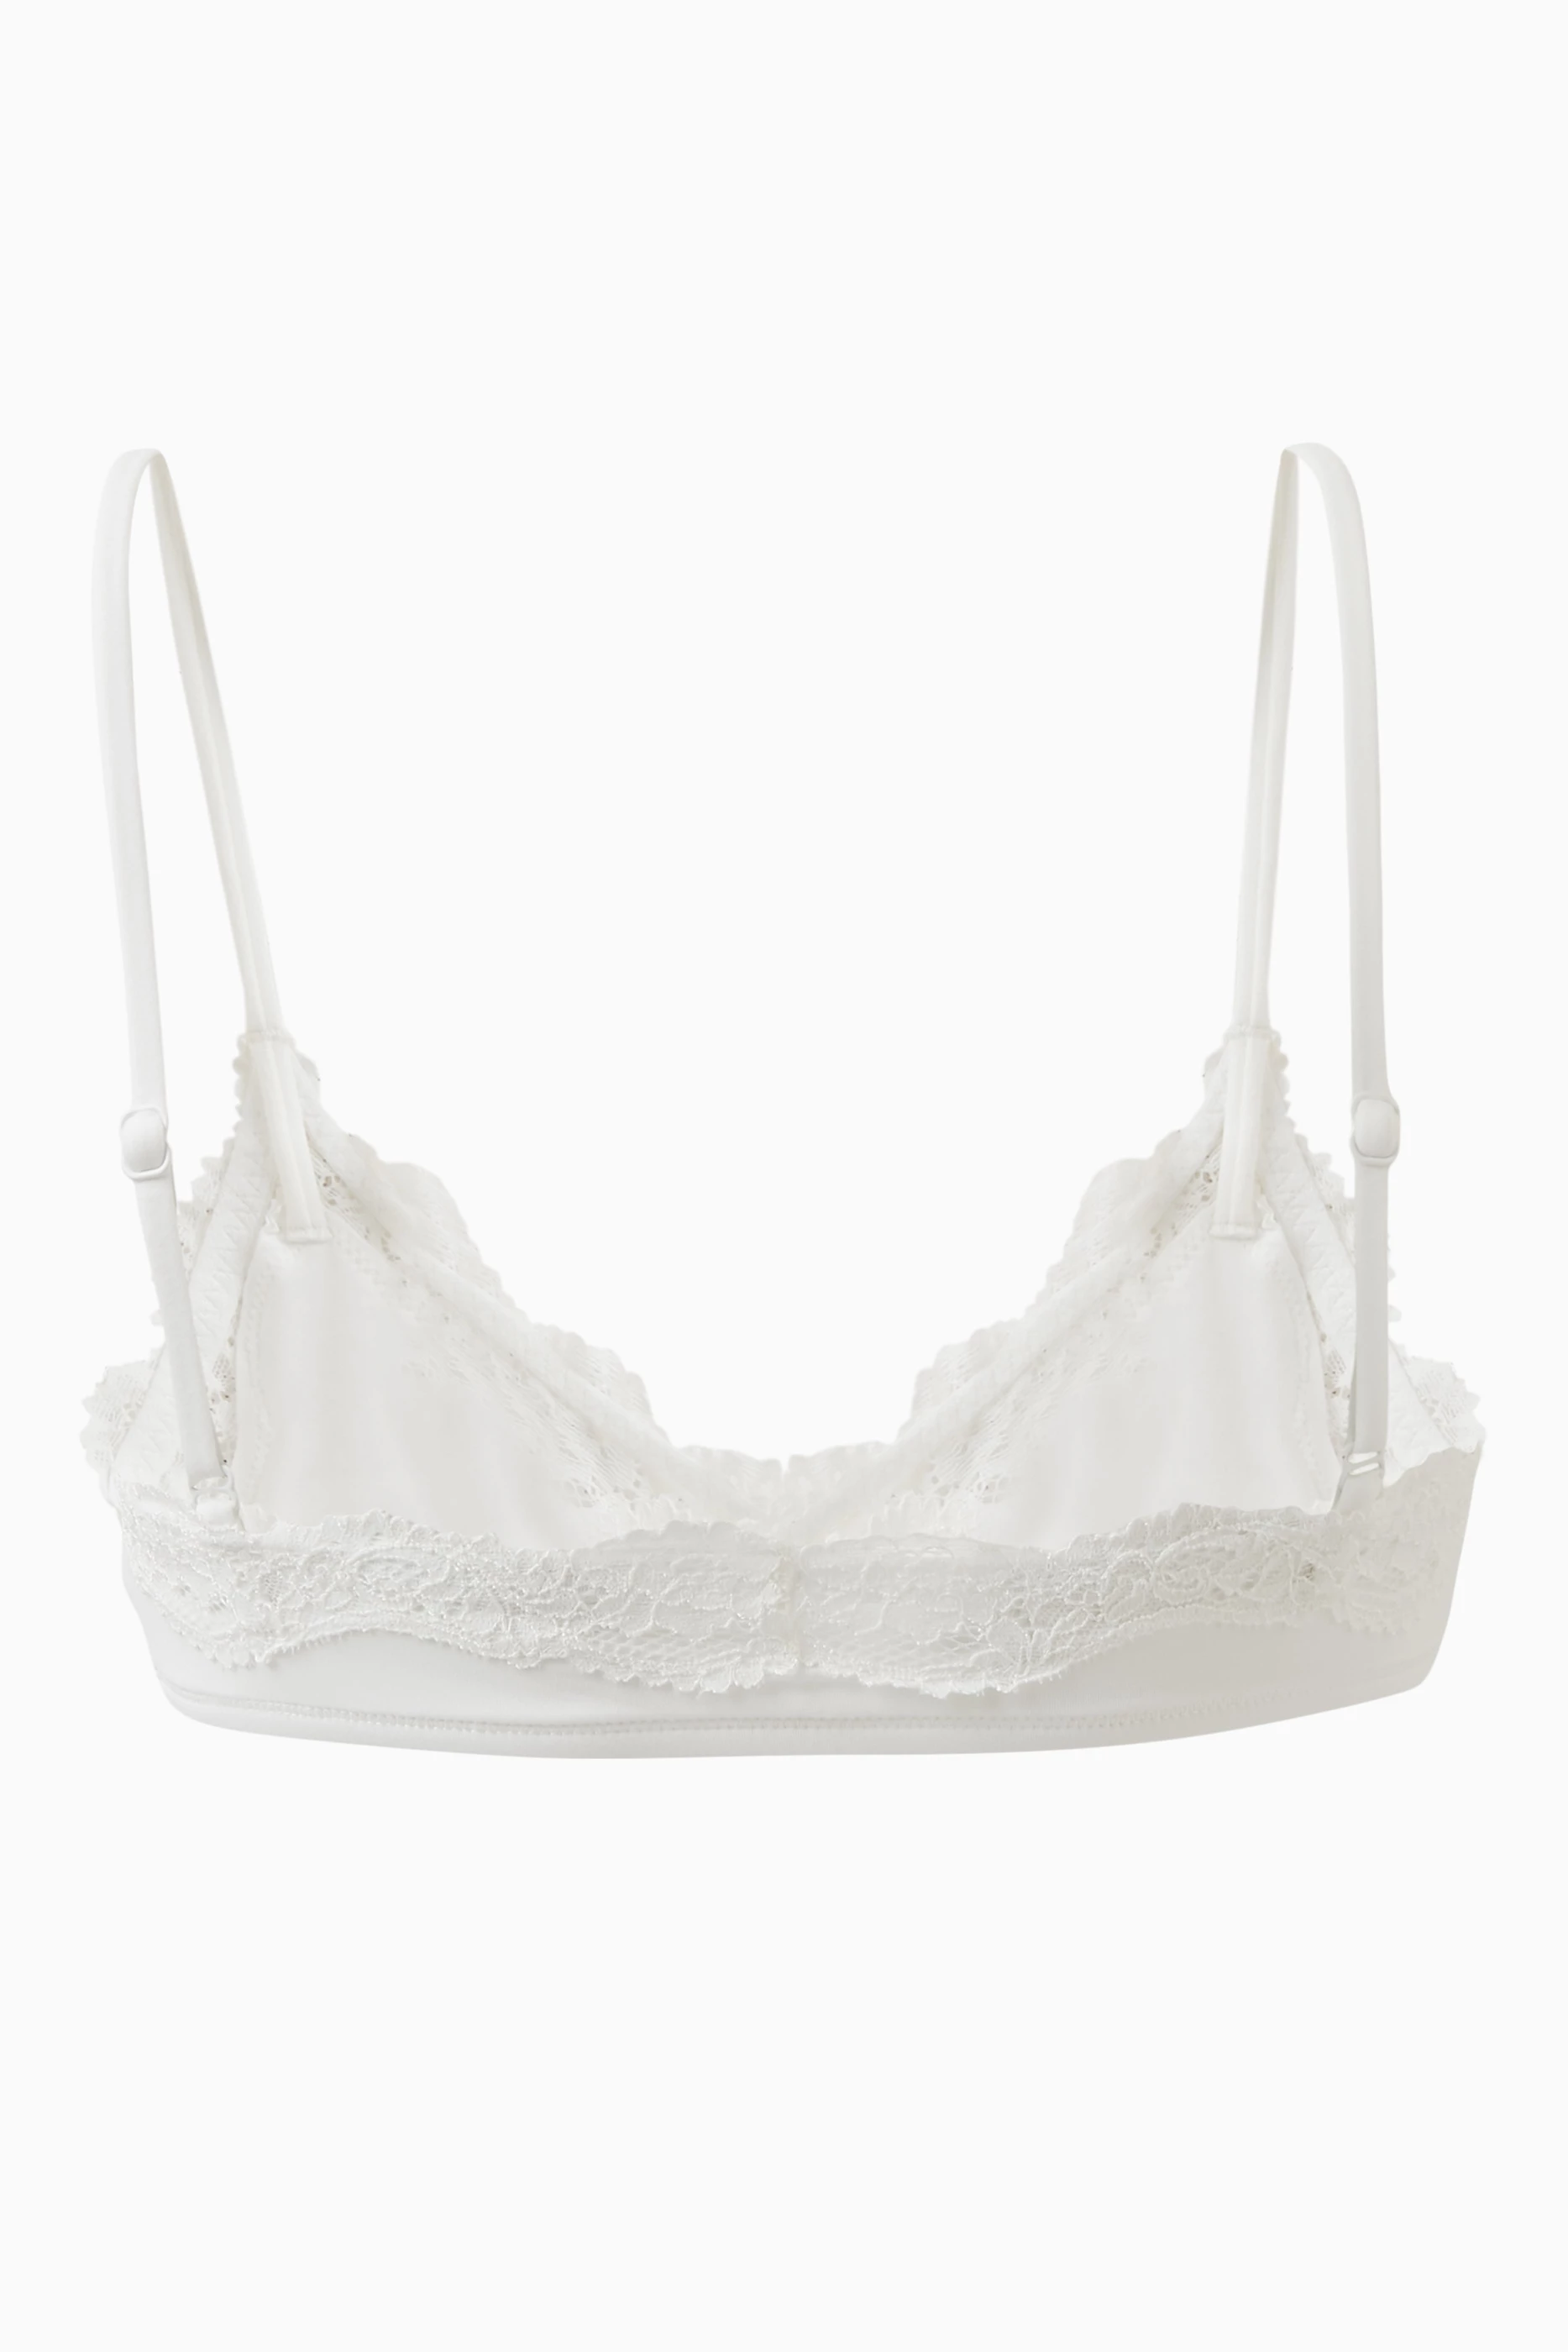 Skims Fits Everybody Lace Underwire Corded Lace Bra in Marble Size